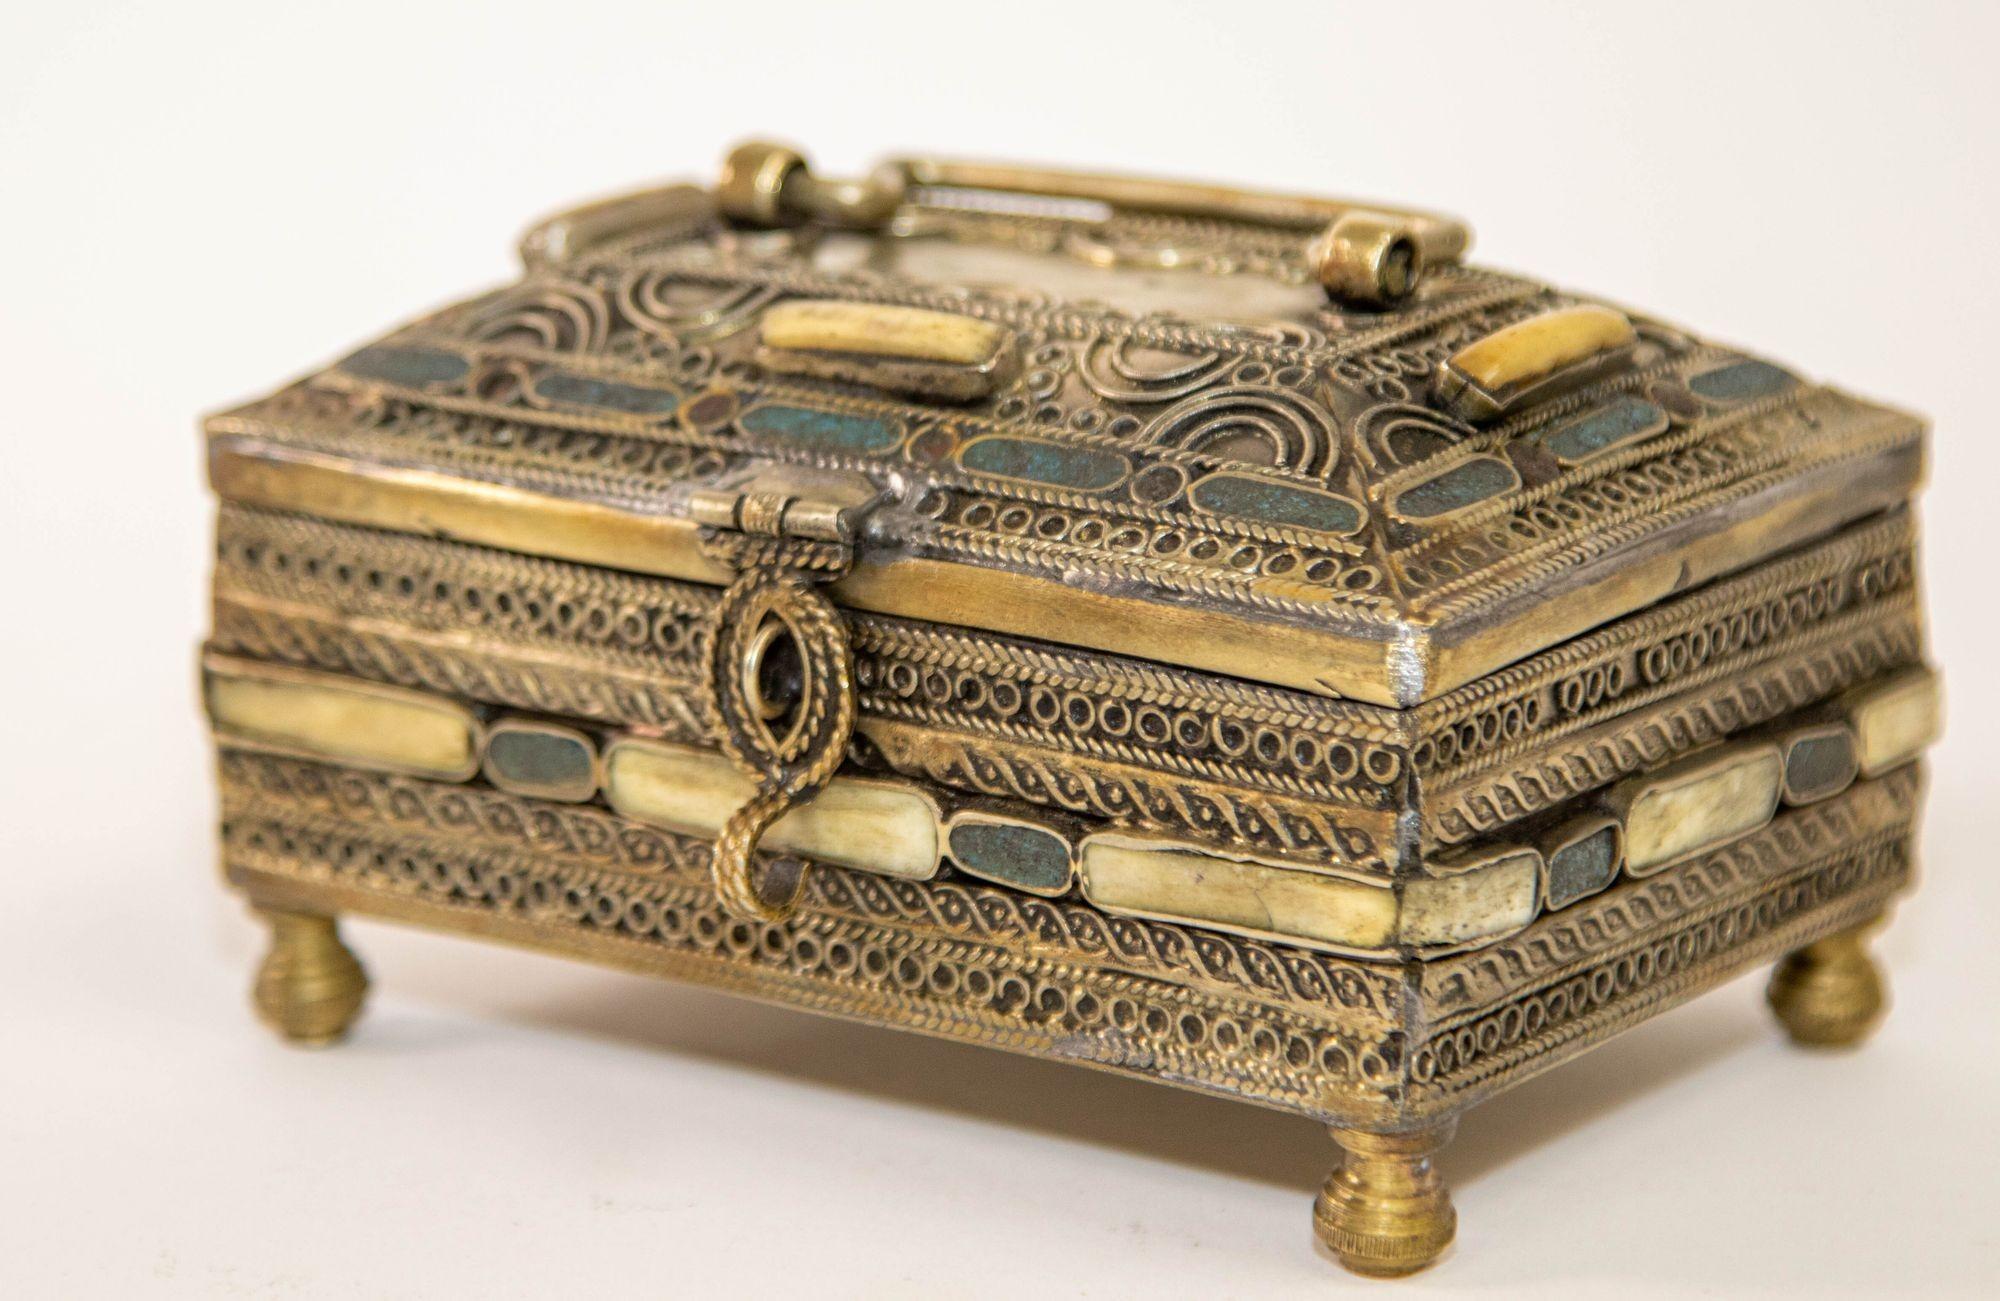 Islamic Spain Toledo Silvered Brass and Enamel Jewelry Box.
A Spanish Toledo silvered and brass damascened steel box circa 1940s.
This small footed metal decorative jewelry box is a beautiful piece of design: precious, refined and